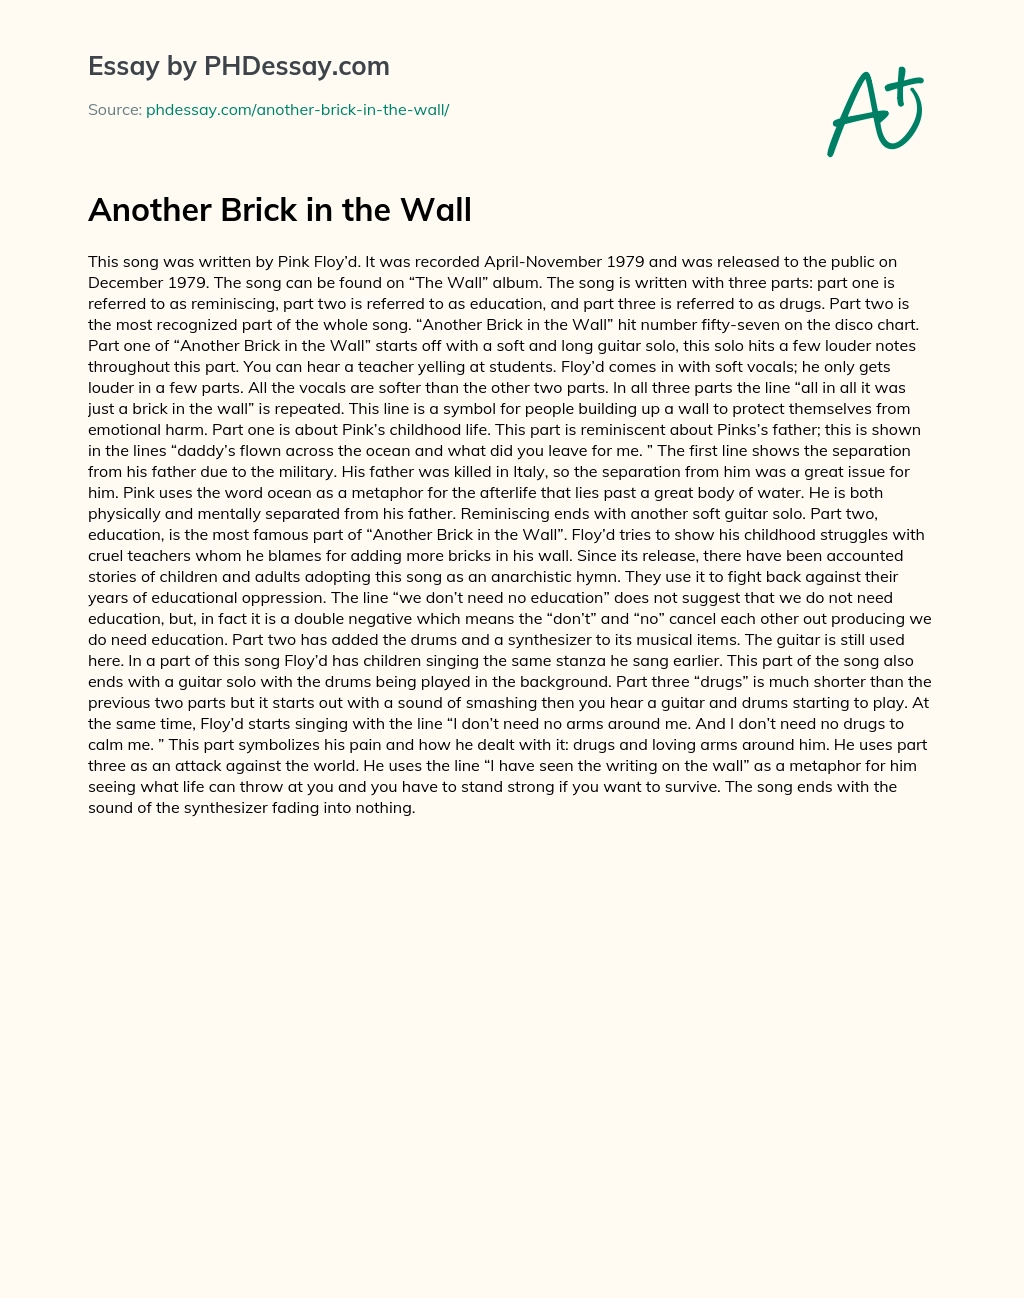 Another Brick in the Wall essay